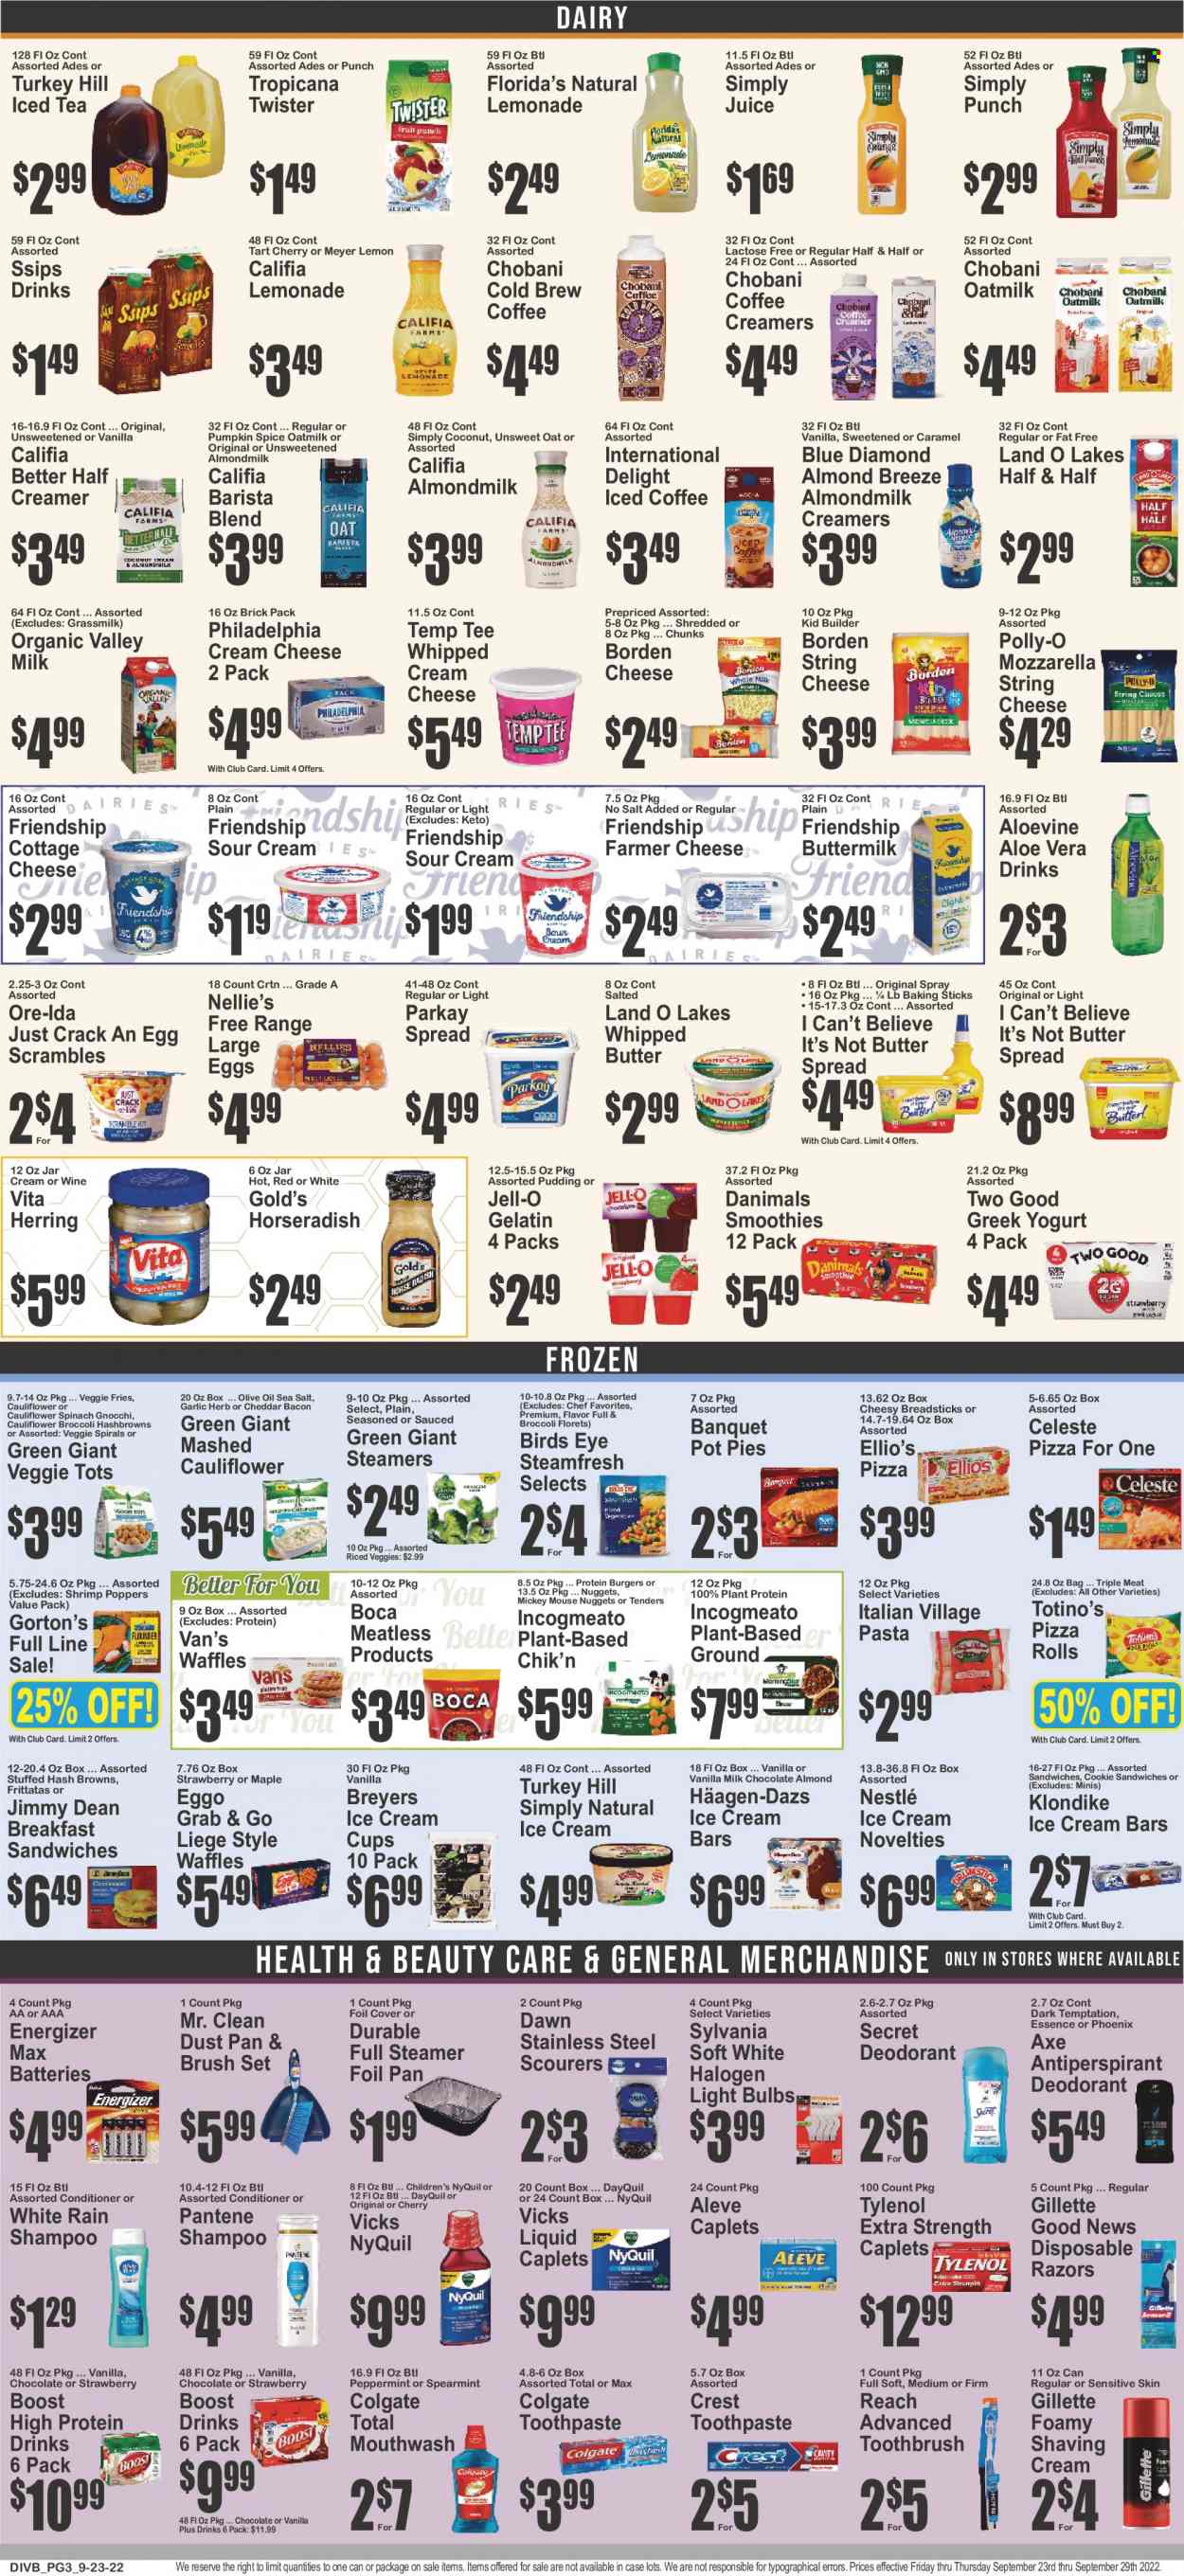 thumbnail - Food Universe Flyer - 09/23/2022 - 09/29/2022 - Sales products - pizza rolls, pot pie, waffles, broccoli, garlic, horseradish, herring, shrimps, Gorton's, gnocchi, pizza, nuggets, hamburger, pasta, Bird's Eye, Jimmy Dean, mashed cauliflower, bacon, cottage cheese, farmer cheese, string cheese, Philadelphia, greek yoghurt, pudding, yoghurt, Chobani, Danimals, almond milk, buttermilk, protein drink, Almond Breeze, oat milk, large eggs, whipped butter, I Can't Believe It's Not Butter, sour cream, whipped cream, creamer, ice cream, ice cream bars, Häagen-Dazs, veggie fries, hash browns, Ore-Ida, Celeste, Nestlé, Florida's Natural, bread sticks, Jell-O, plant protein, spice, olive oil, oil, Blue Diamond, lemonade, juice, ice tea, Tropicana Twister, smoothie, iced coffee, Boost, red wine, wine, shampoo, Colgate, toothbrush, toothpaste, mouthwash, Crest, conditioner, Pantene, anti-perspirant, deodorant, Axe, Gillette, disposable razor, Vicks, dustpan & brush, cup, battery, bulb, Energizer, light bulb, Sylvania, Aleve, DayQuil, Tylenol, NyQuil, Half and half. Page 3.